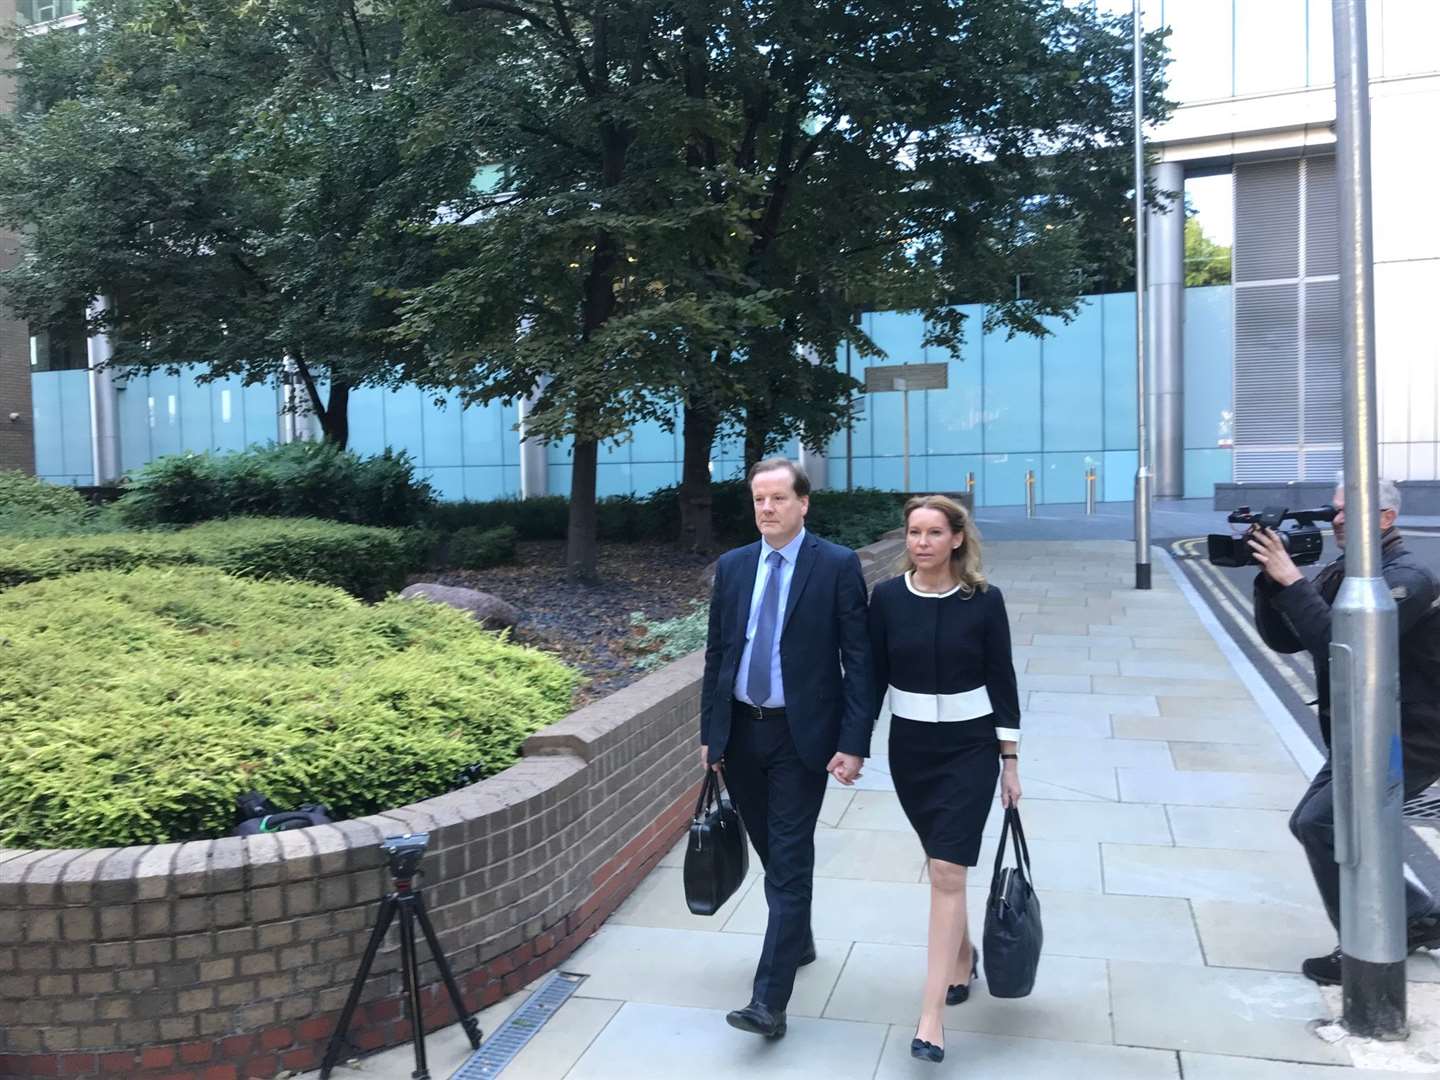 Charlie Elphicke was supported by wife Natalie during his trial at Southwark Crown Court